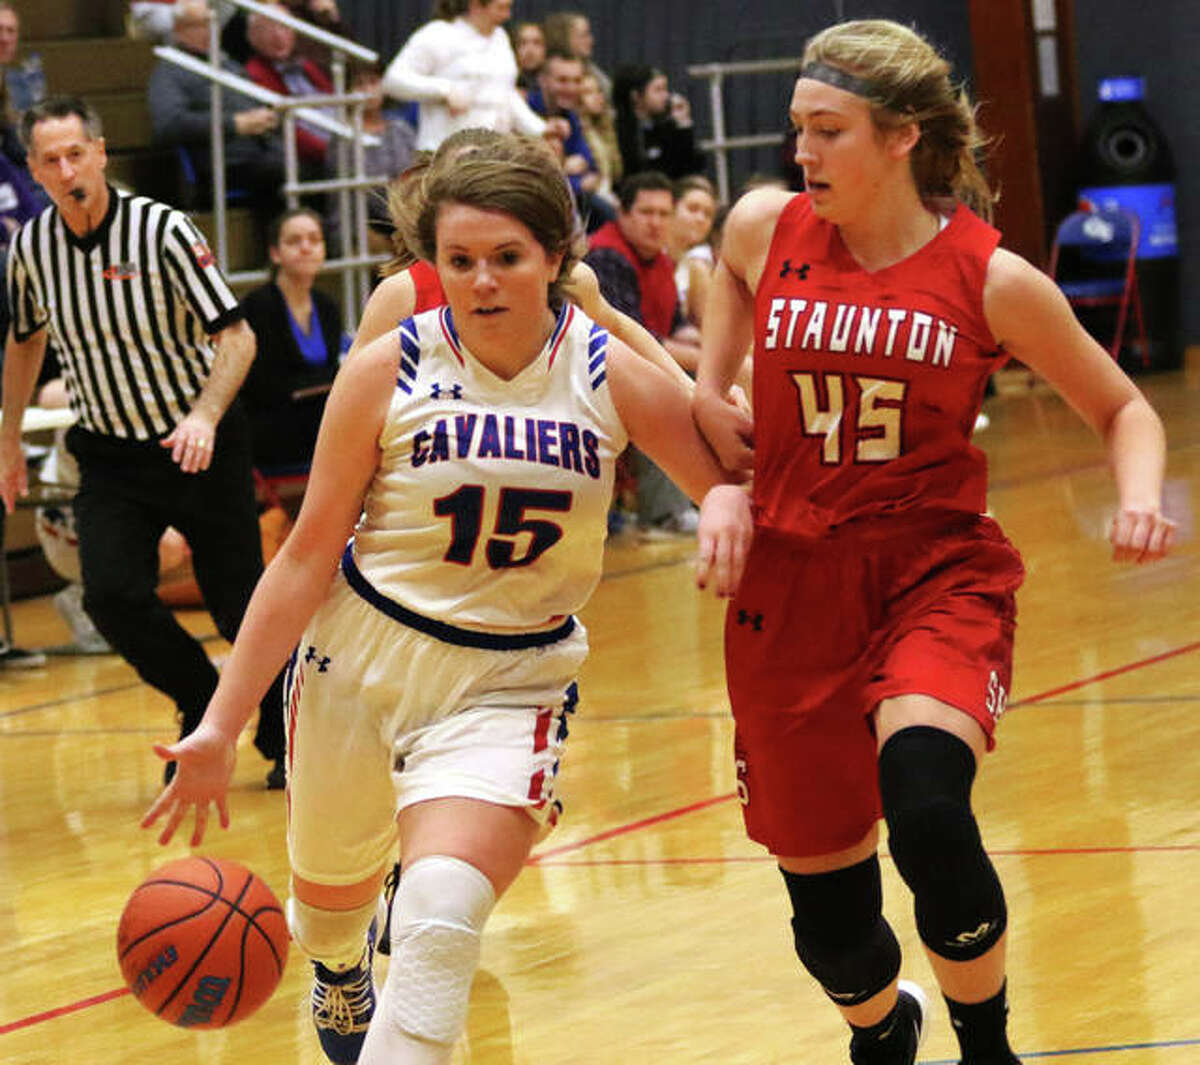 Carlinville’s Gracie Reels (15), shown taking the ball to the basket against Staunton’s Haris Legendre on Thursday, scored 18 points Saturday in the Cavs’ victory over Litchfield at the Carlinville Holiday Tourney.